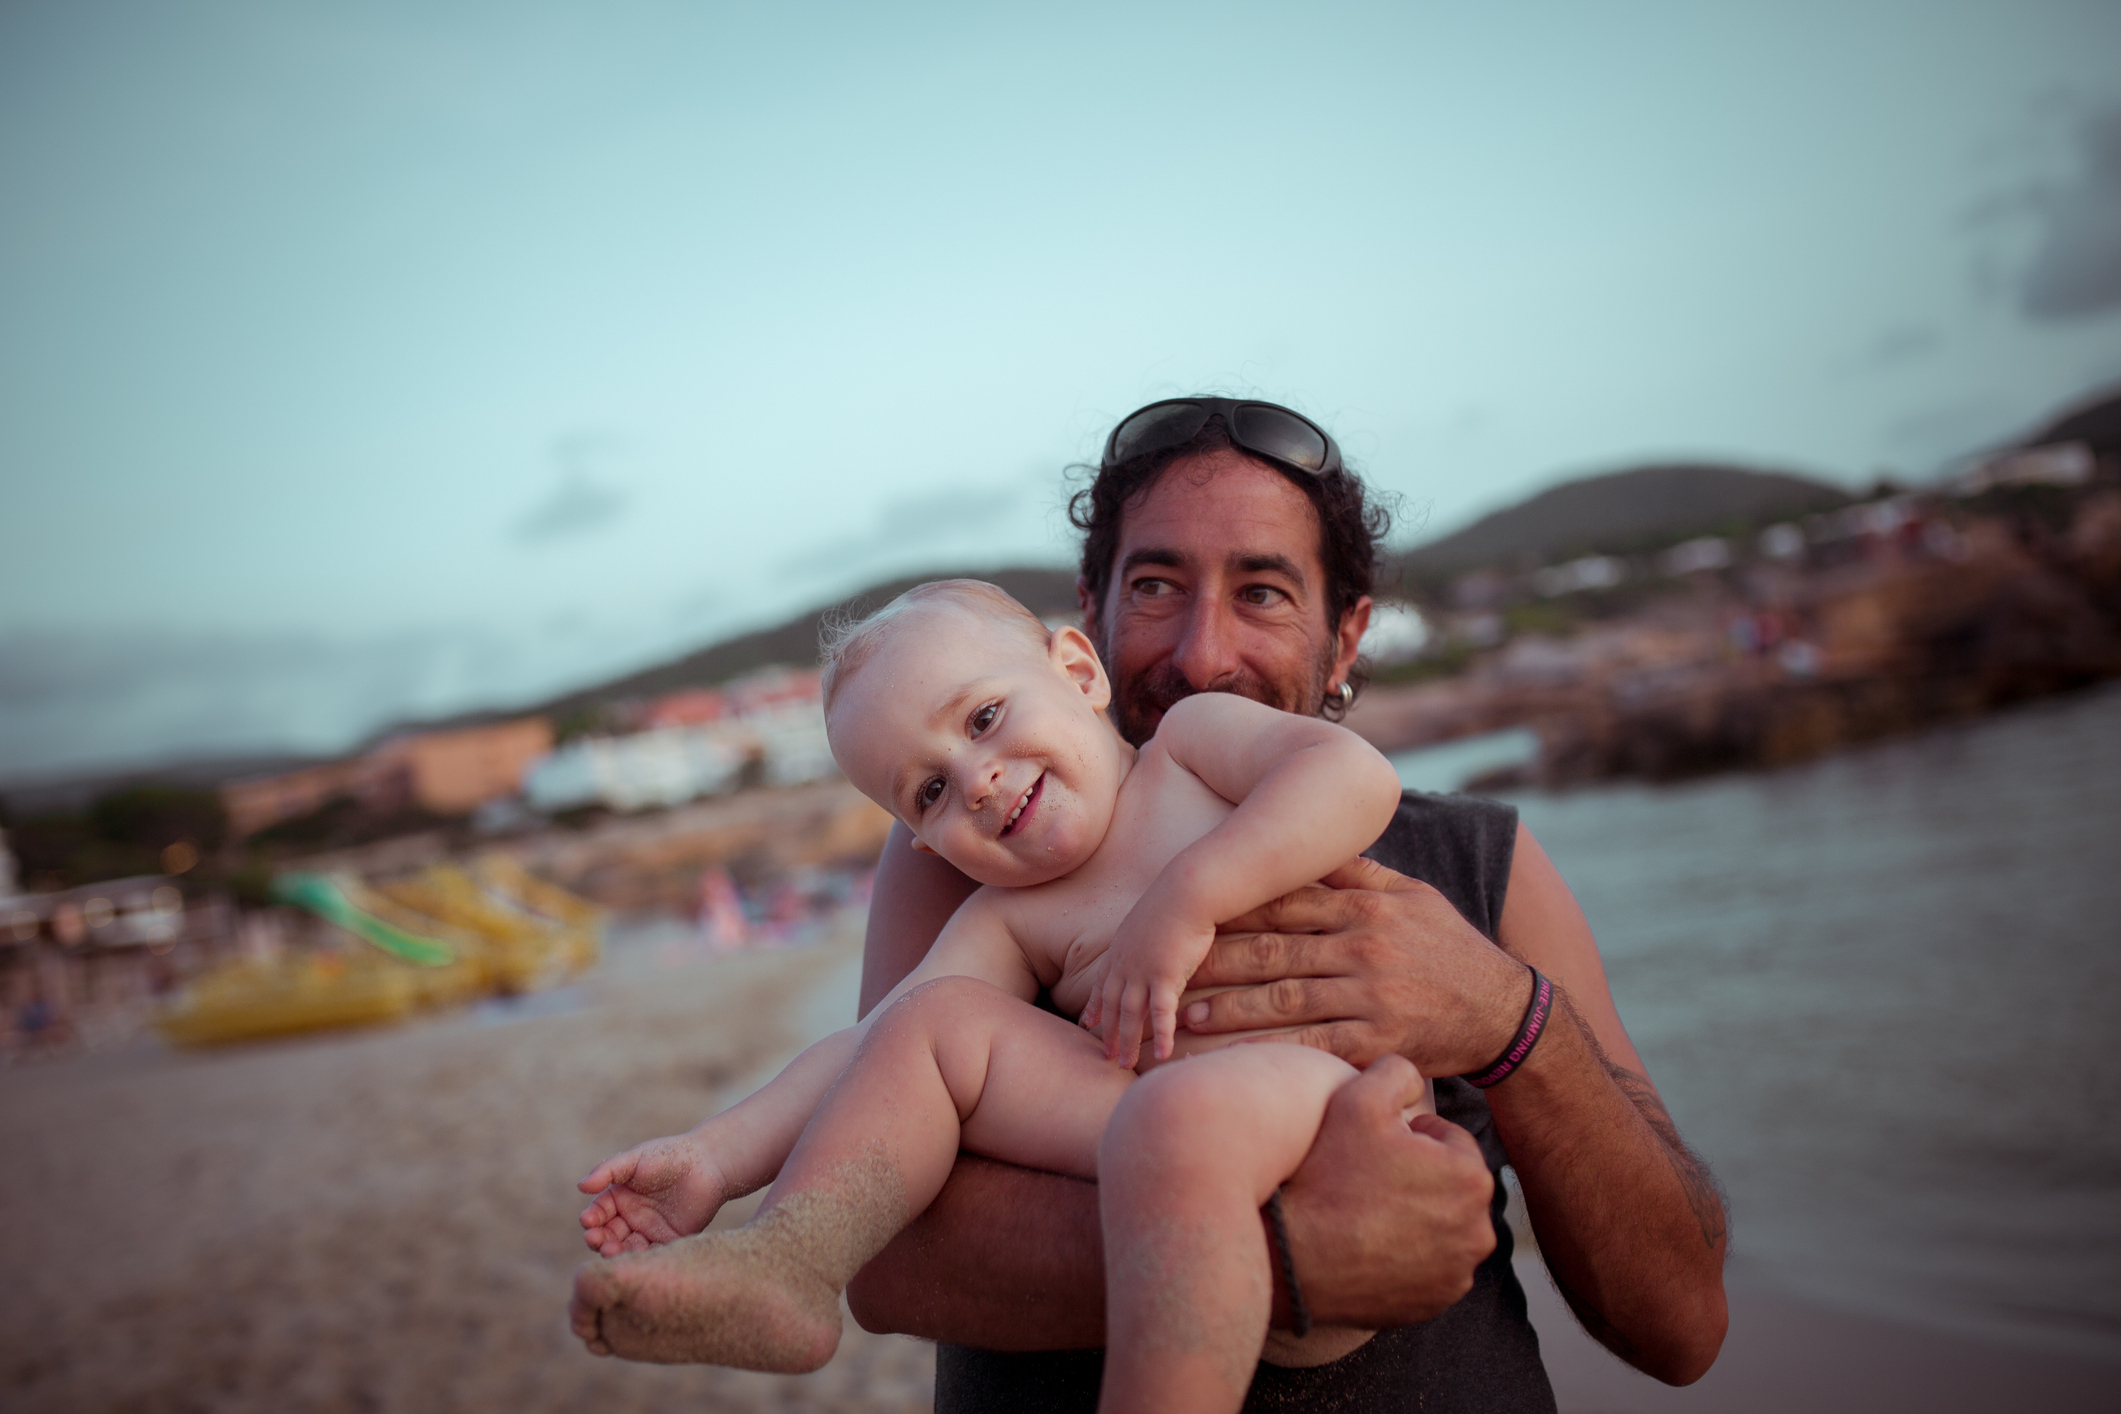 Man holding a smiling baby at a beach, both looking at camera, with coastal landscape in the background